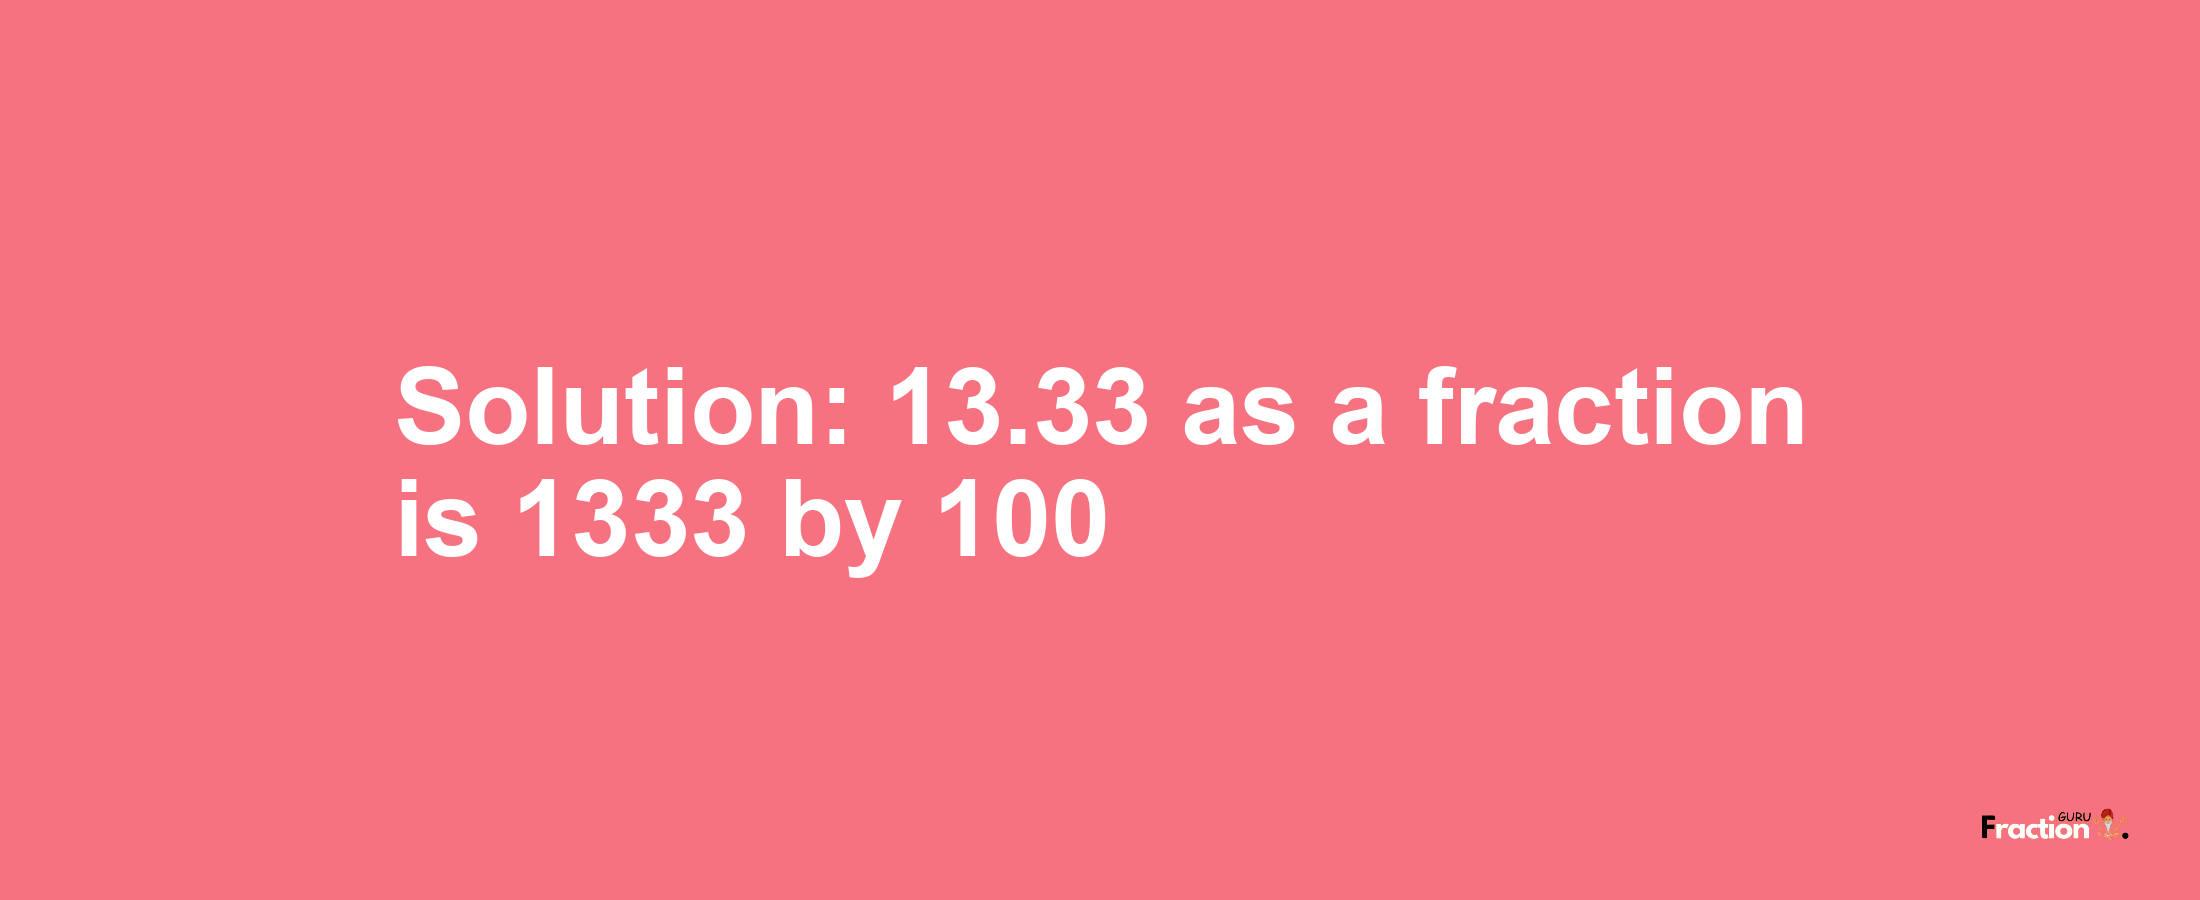 Solution:13.33 as a fraction is 1333/100